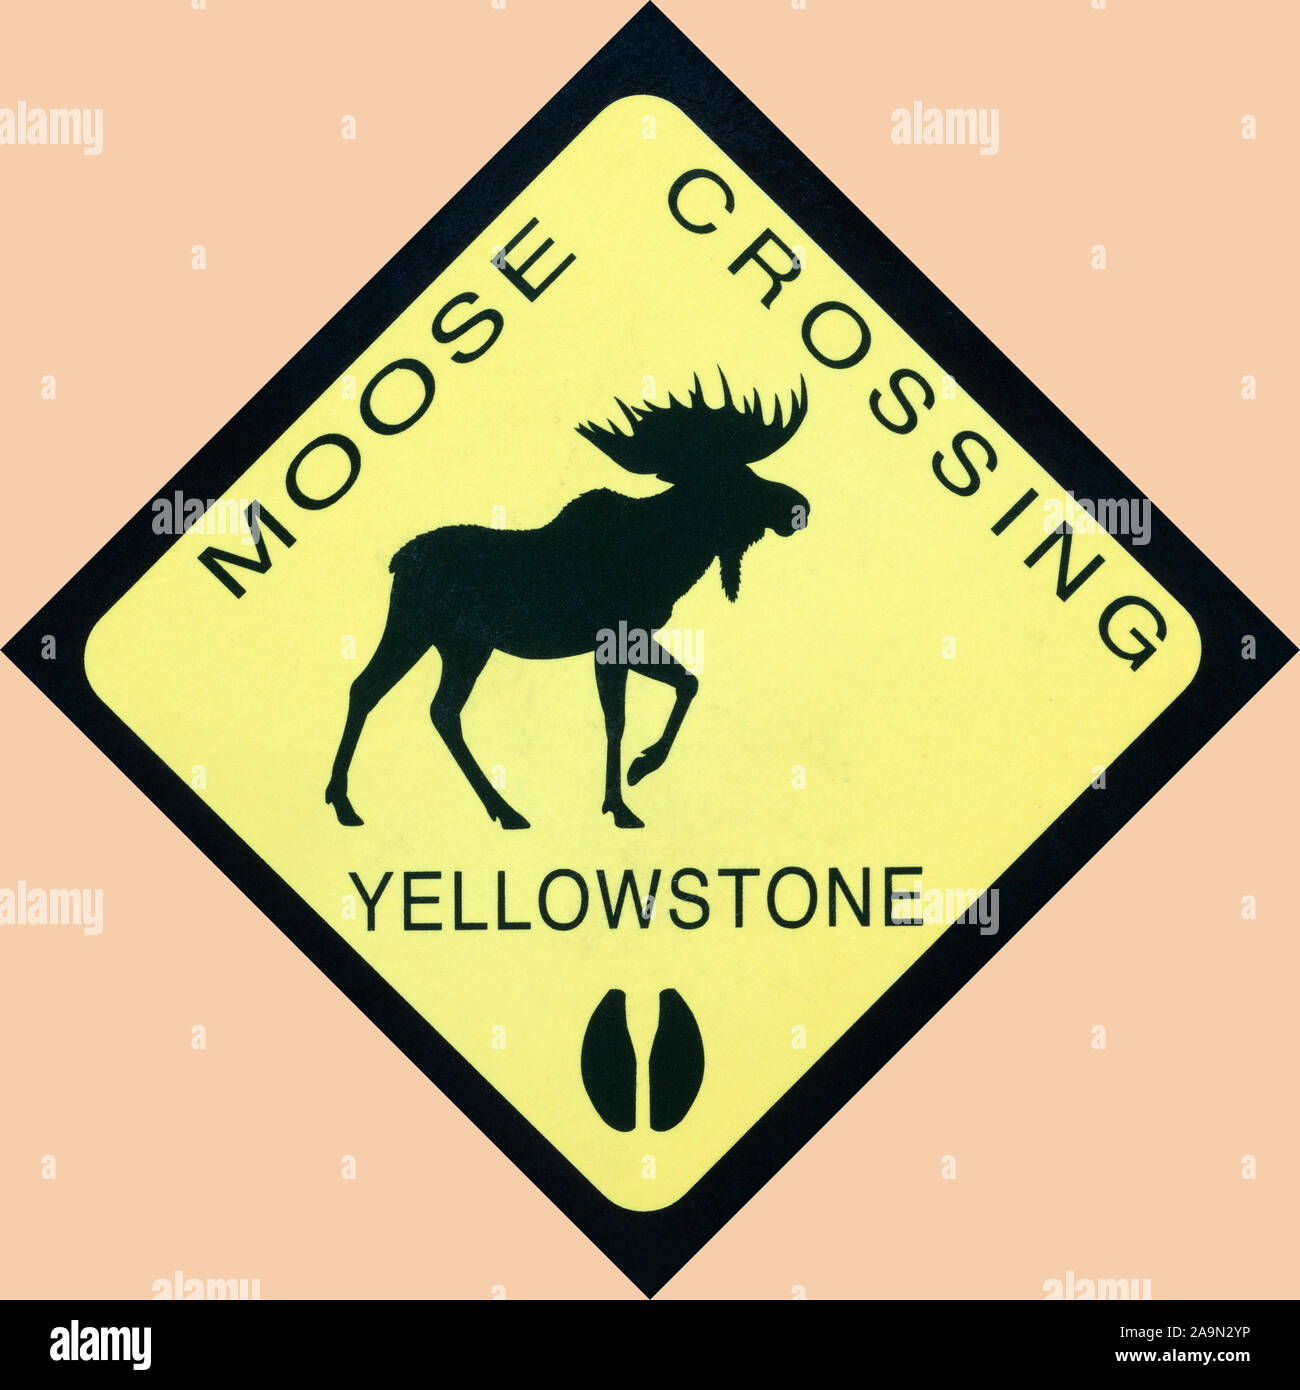 Copy of road sign warning about moose crossing in Yellowstone Stock Photo